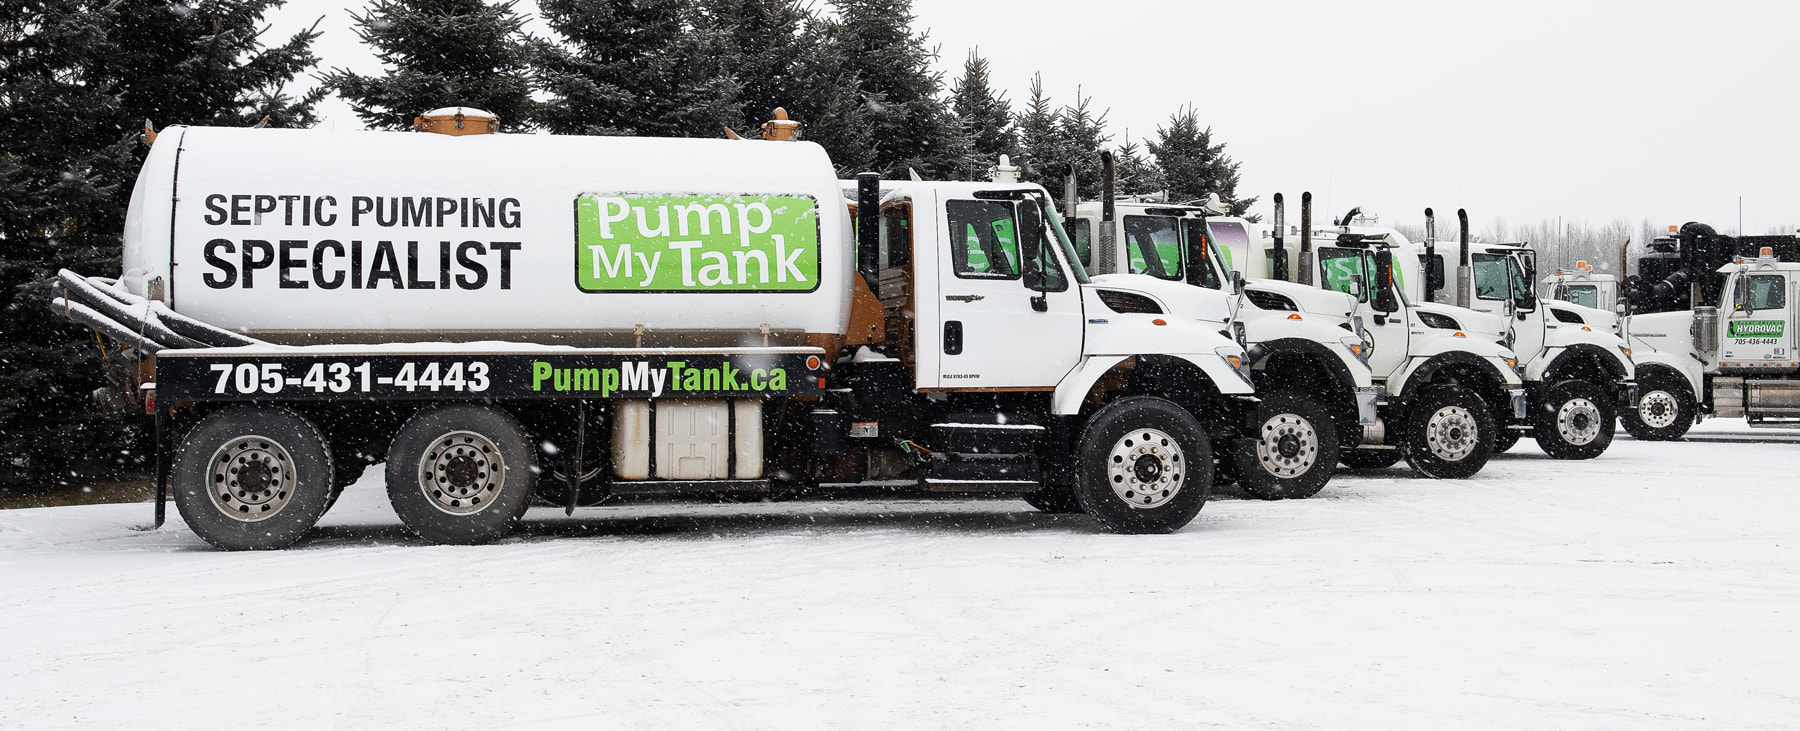 Pump My Tank - Ontario's Most Trusted Name in Septic Pumping - The